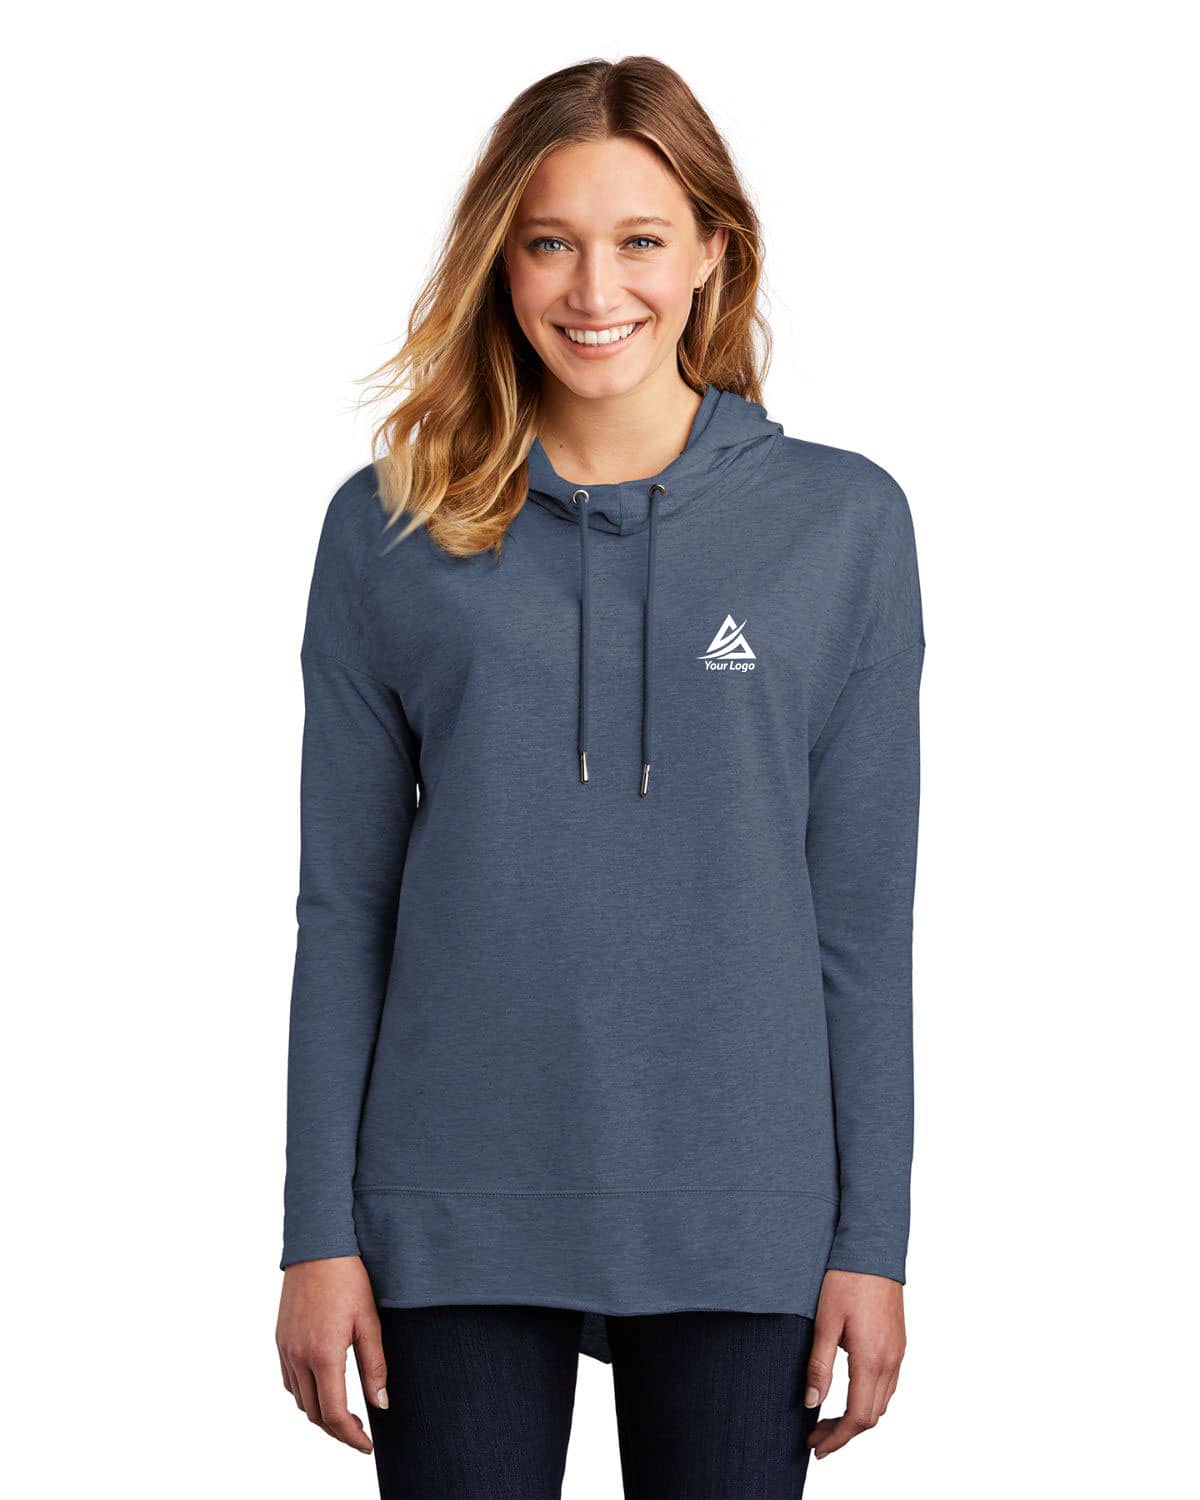 District DT671 Womens Featherweight French Terry Hoodie